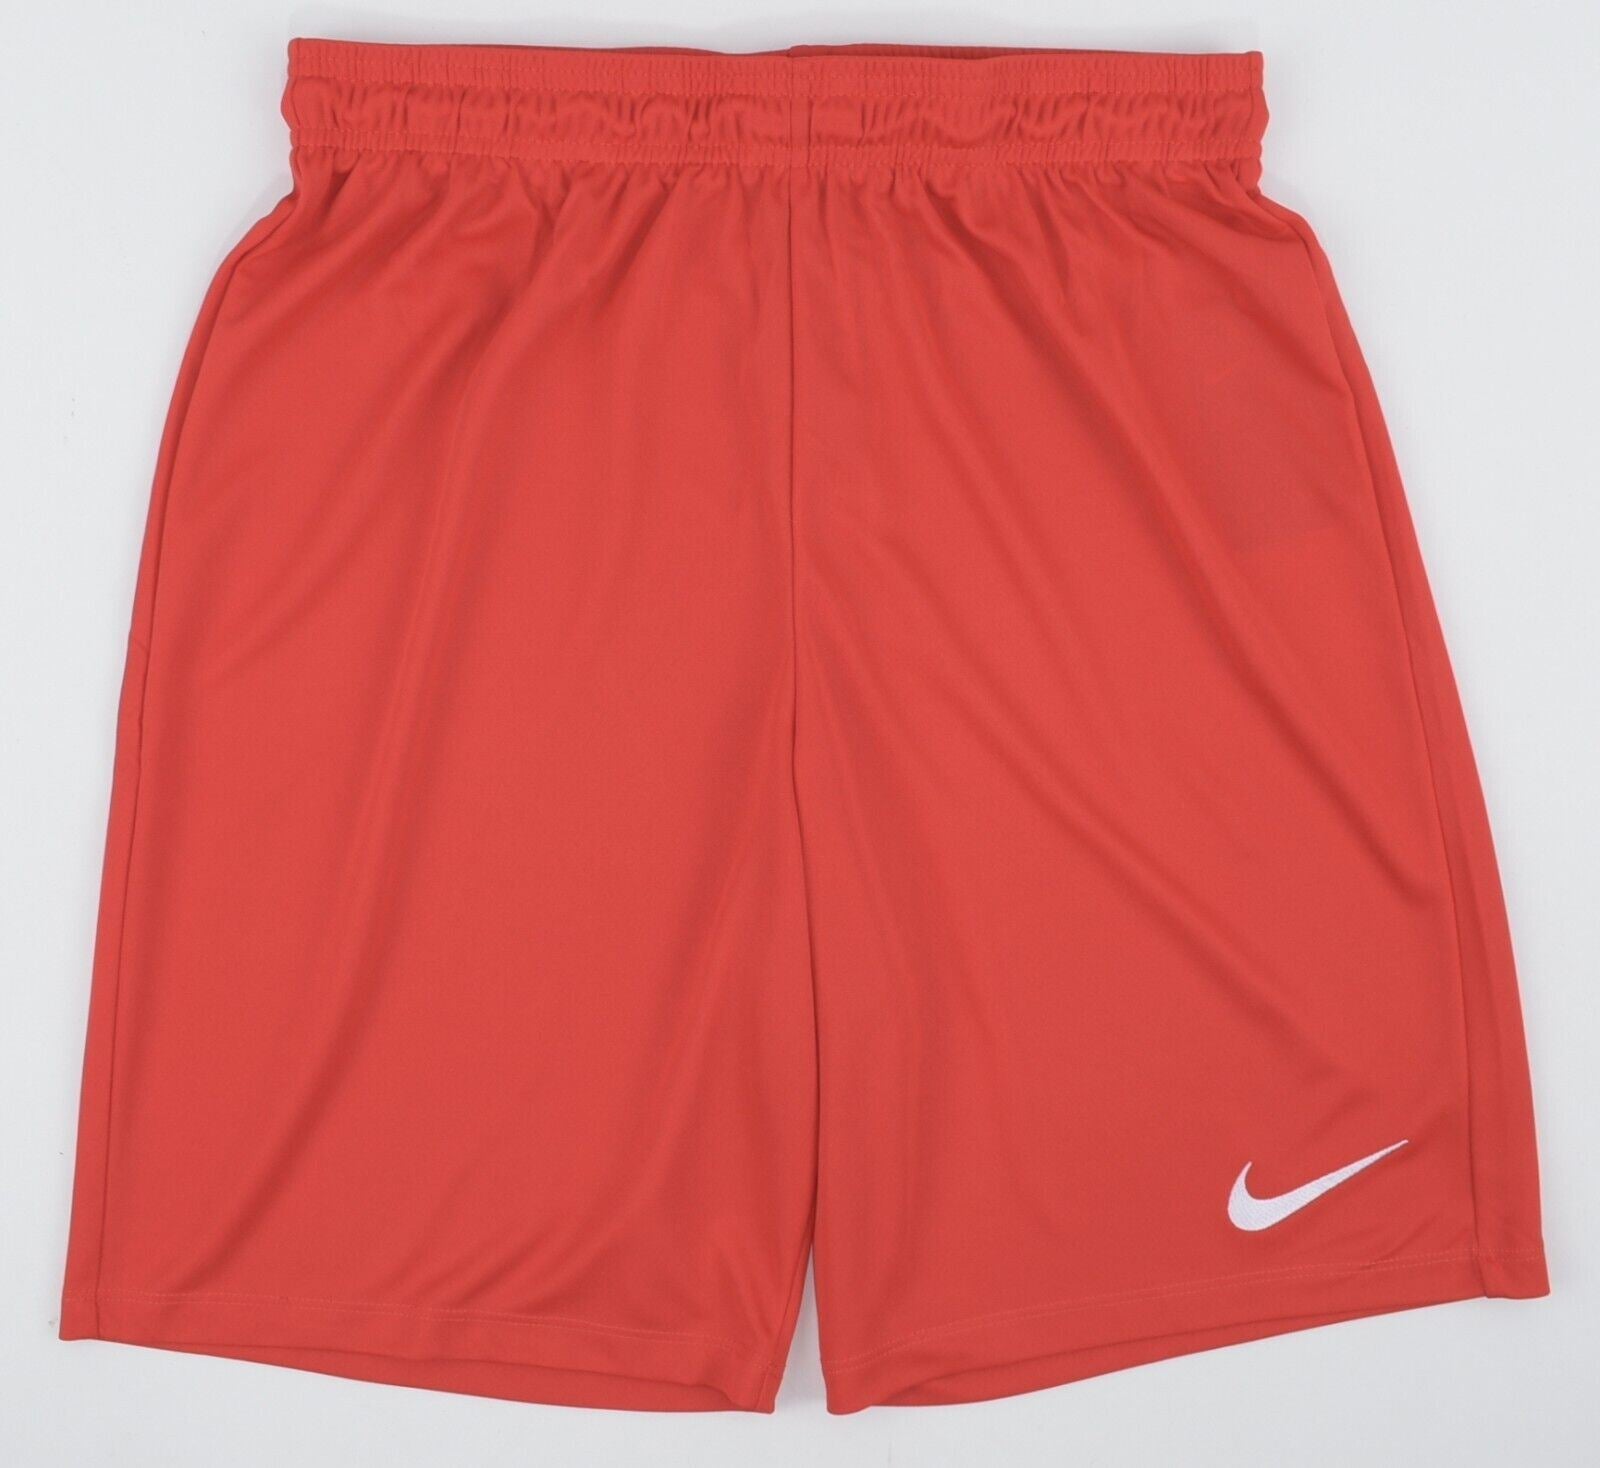 NIKE Men's PARK III Football Training Dri-Fit Shorts, Team Red, size LARGE